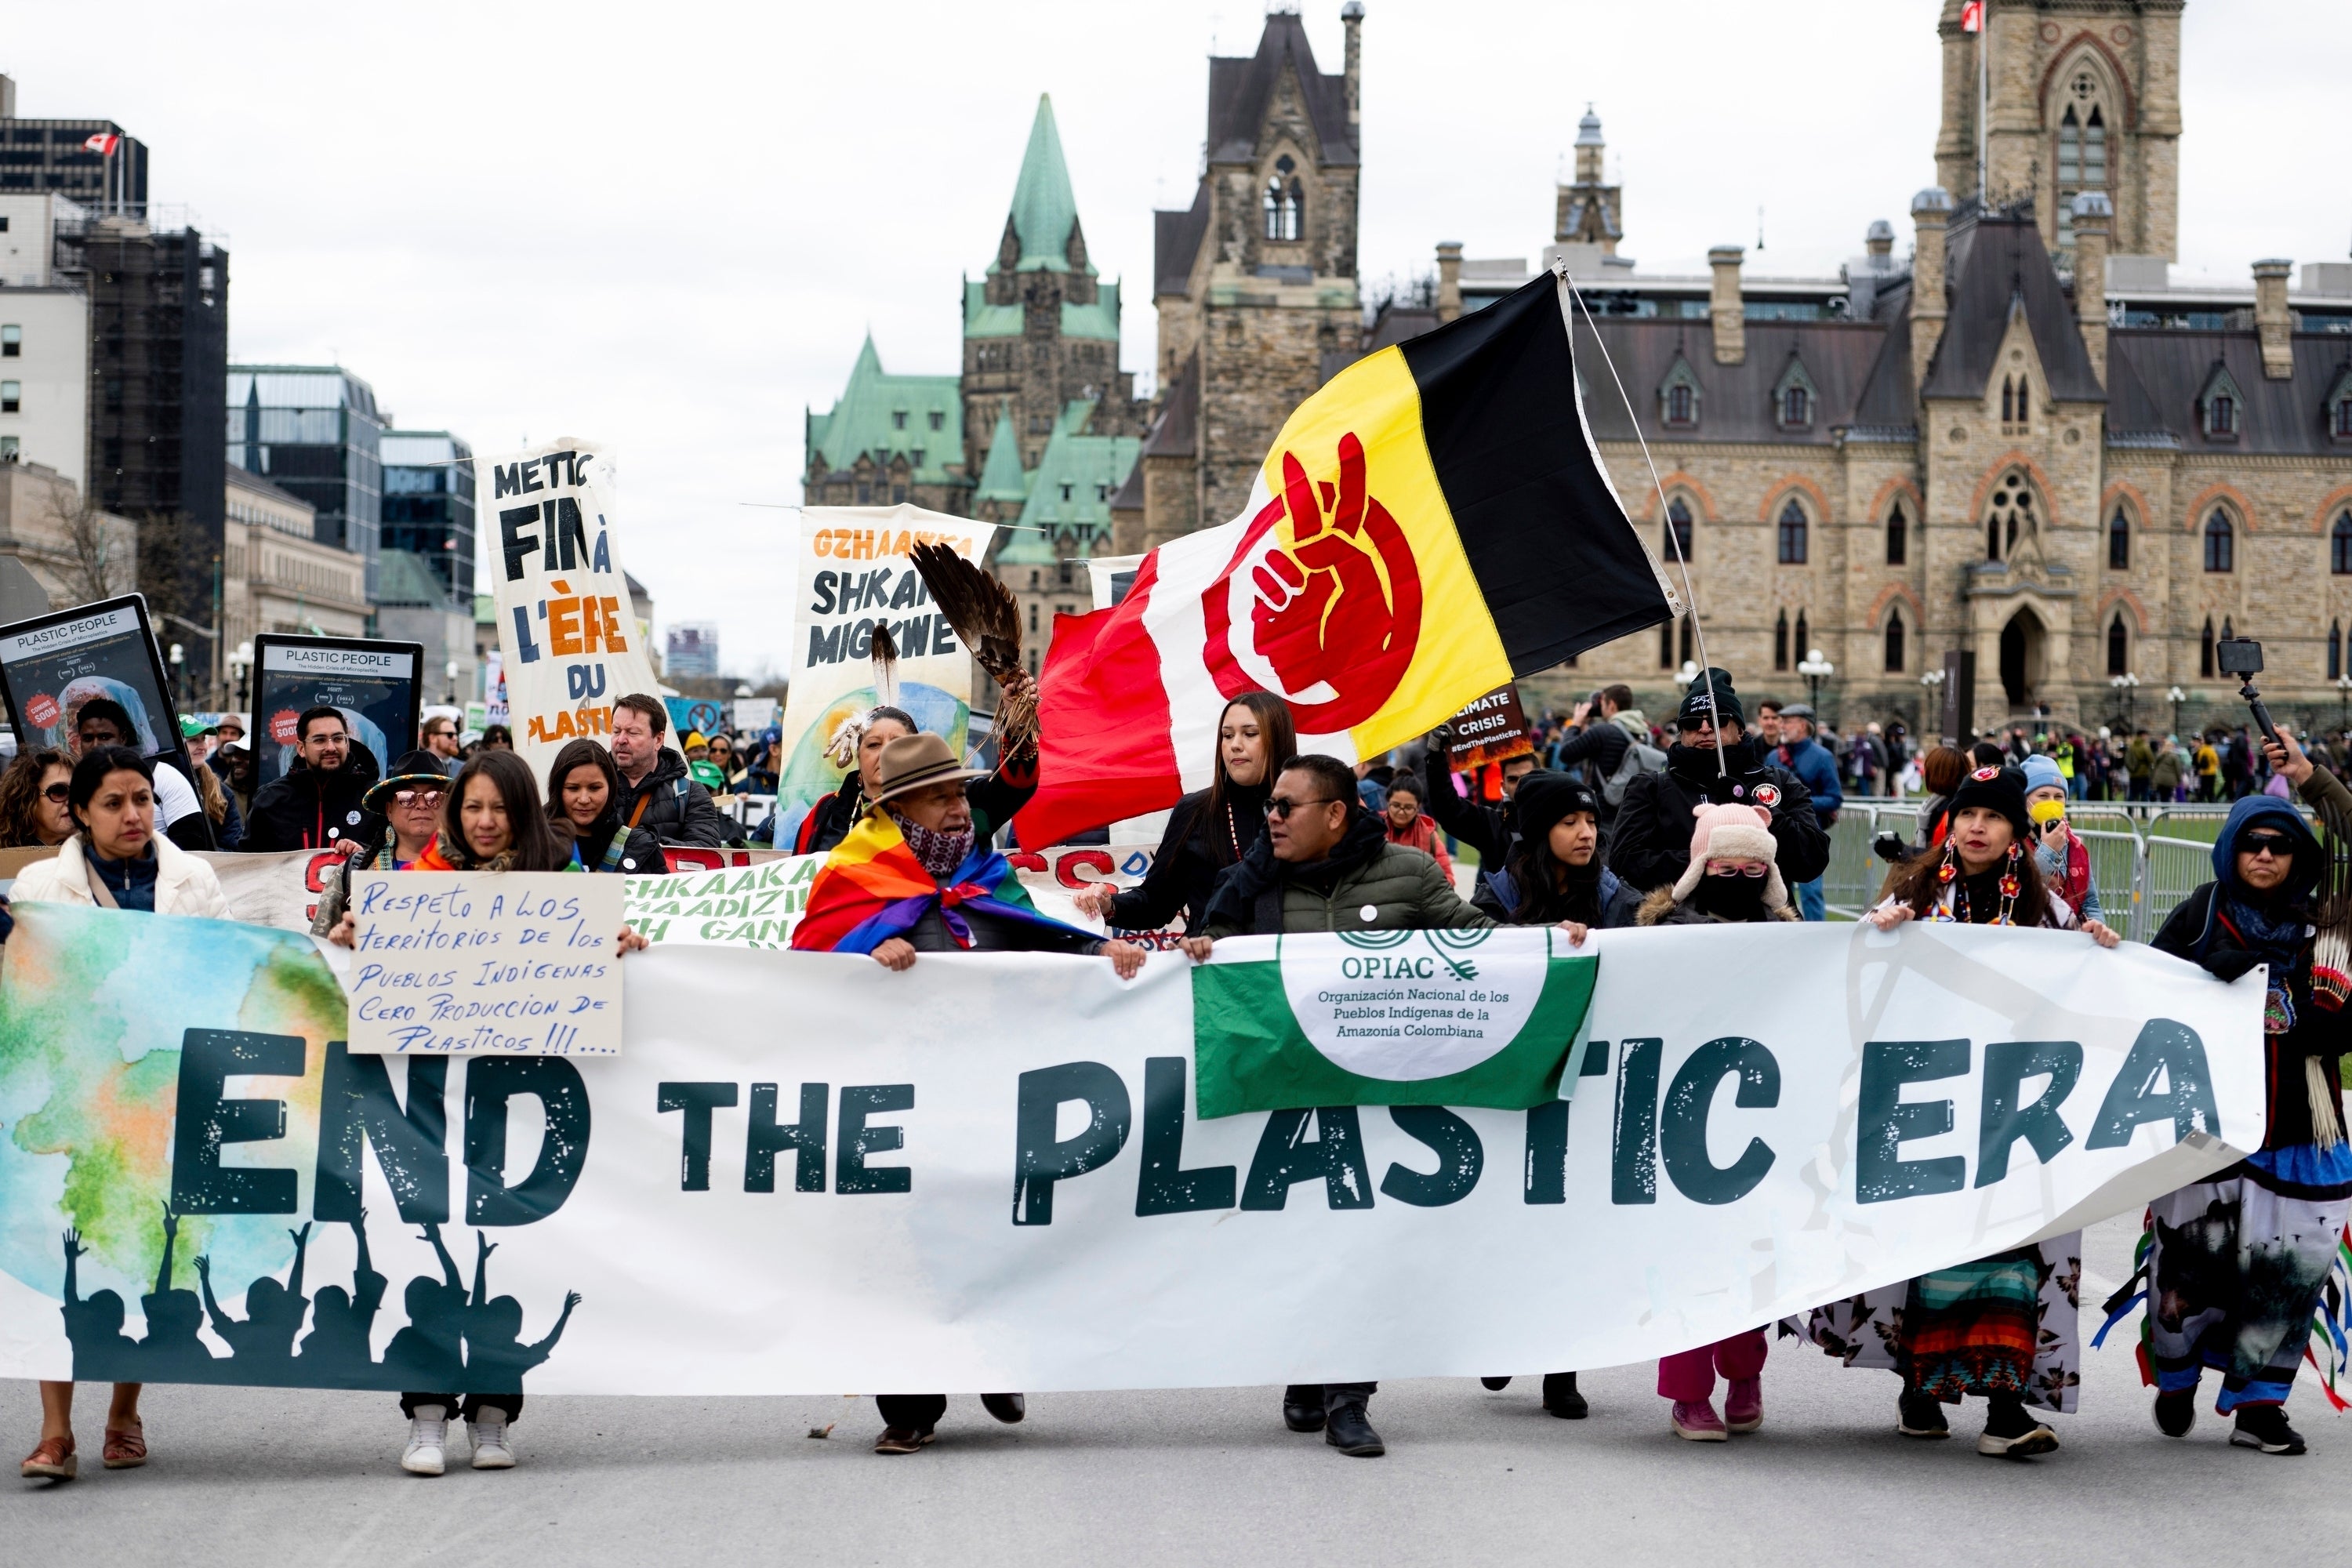 People participate in a March to End the Plastic Era on Parliament Hill in Ottawa, Ontario